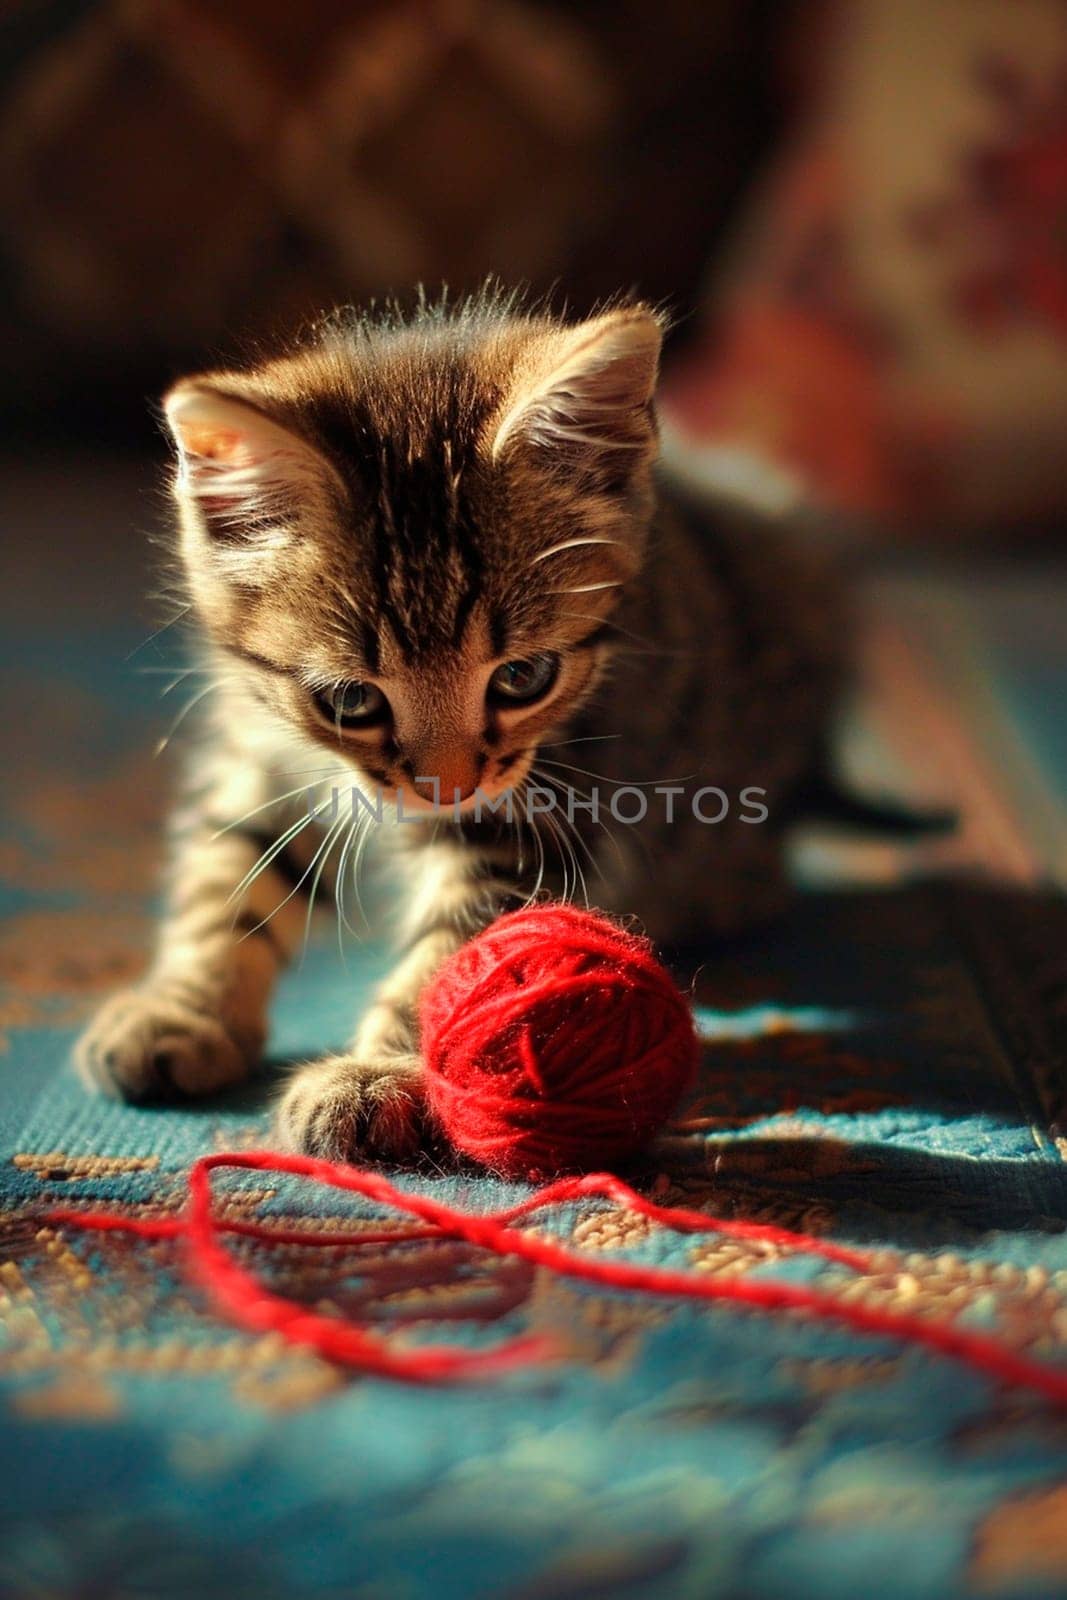 the cat plays with a ball of thread. Selective focus. animal.